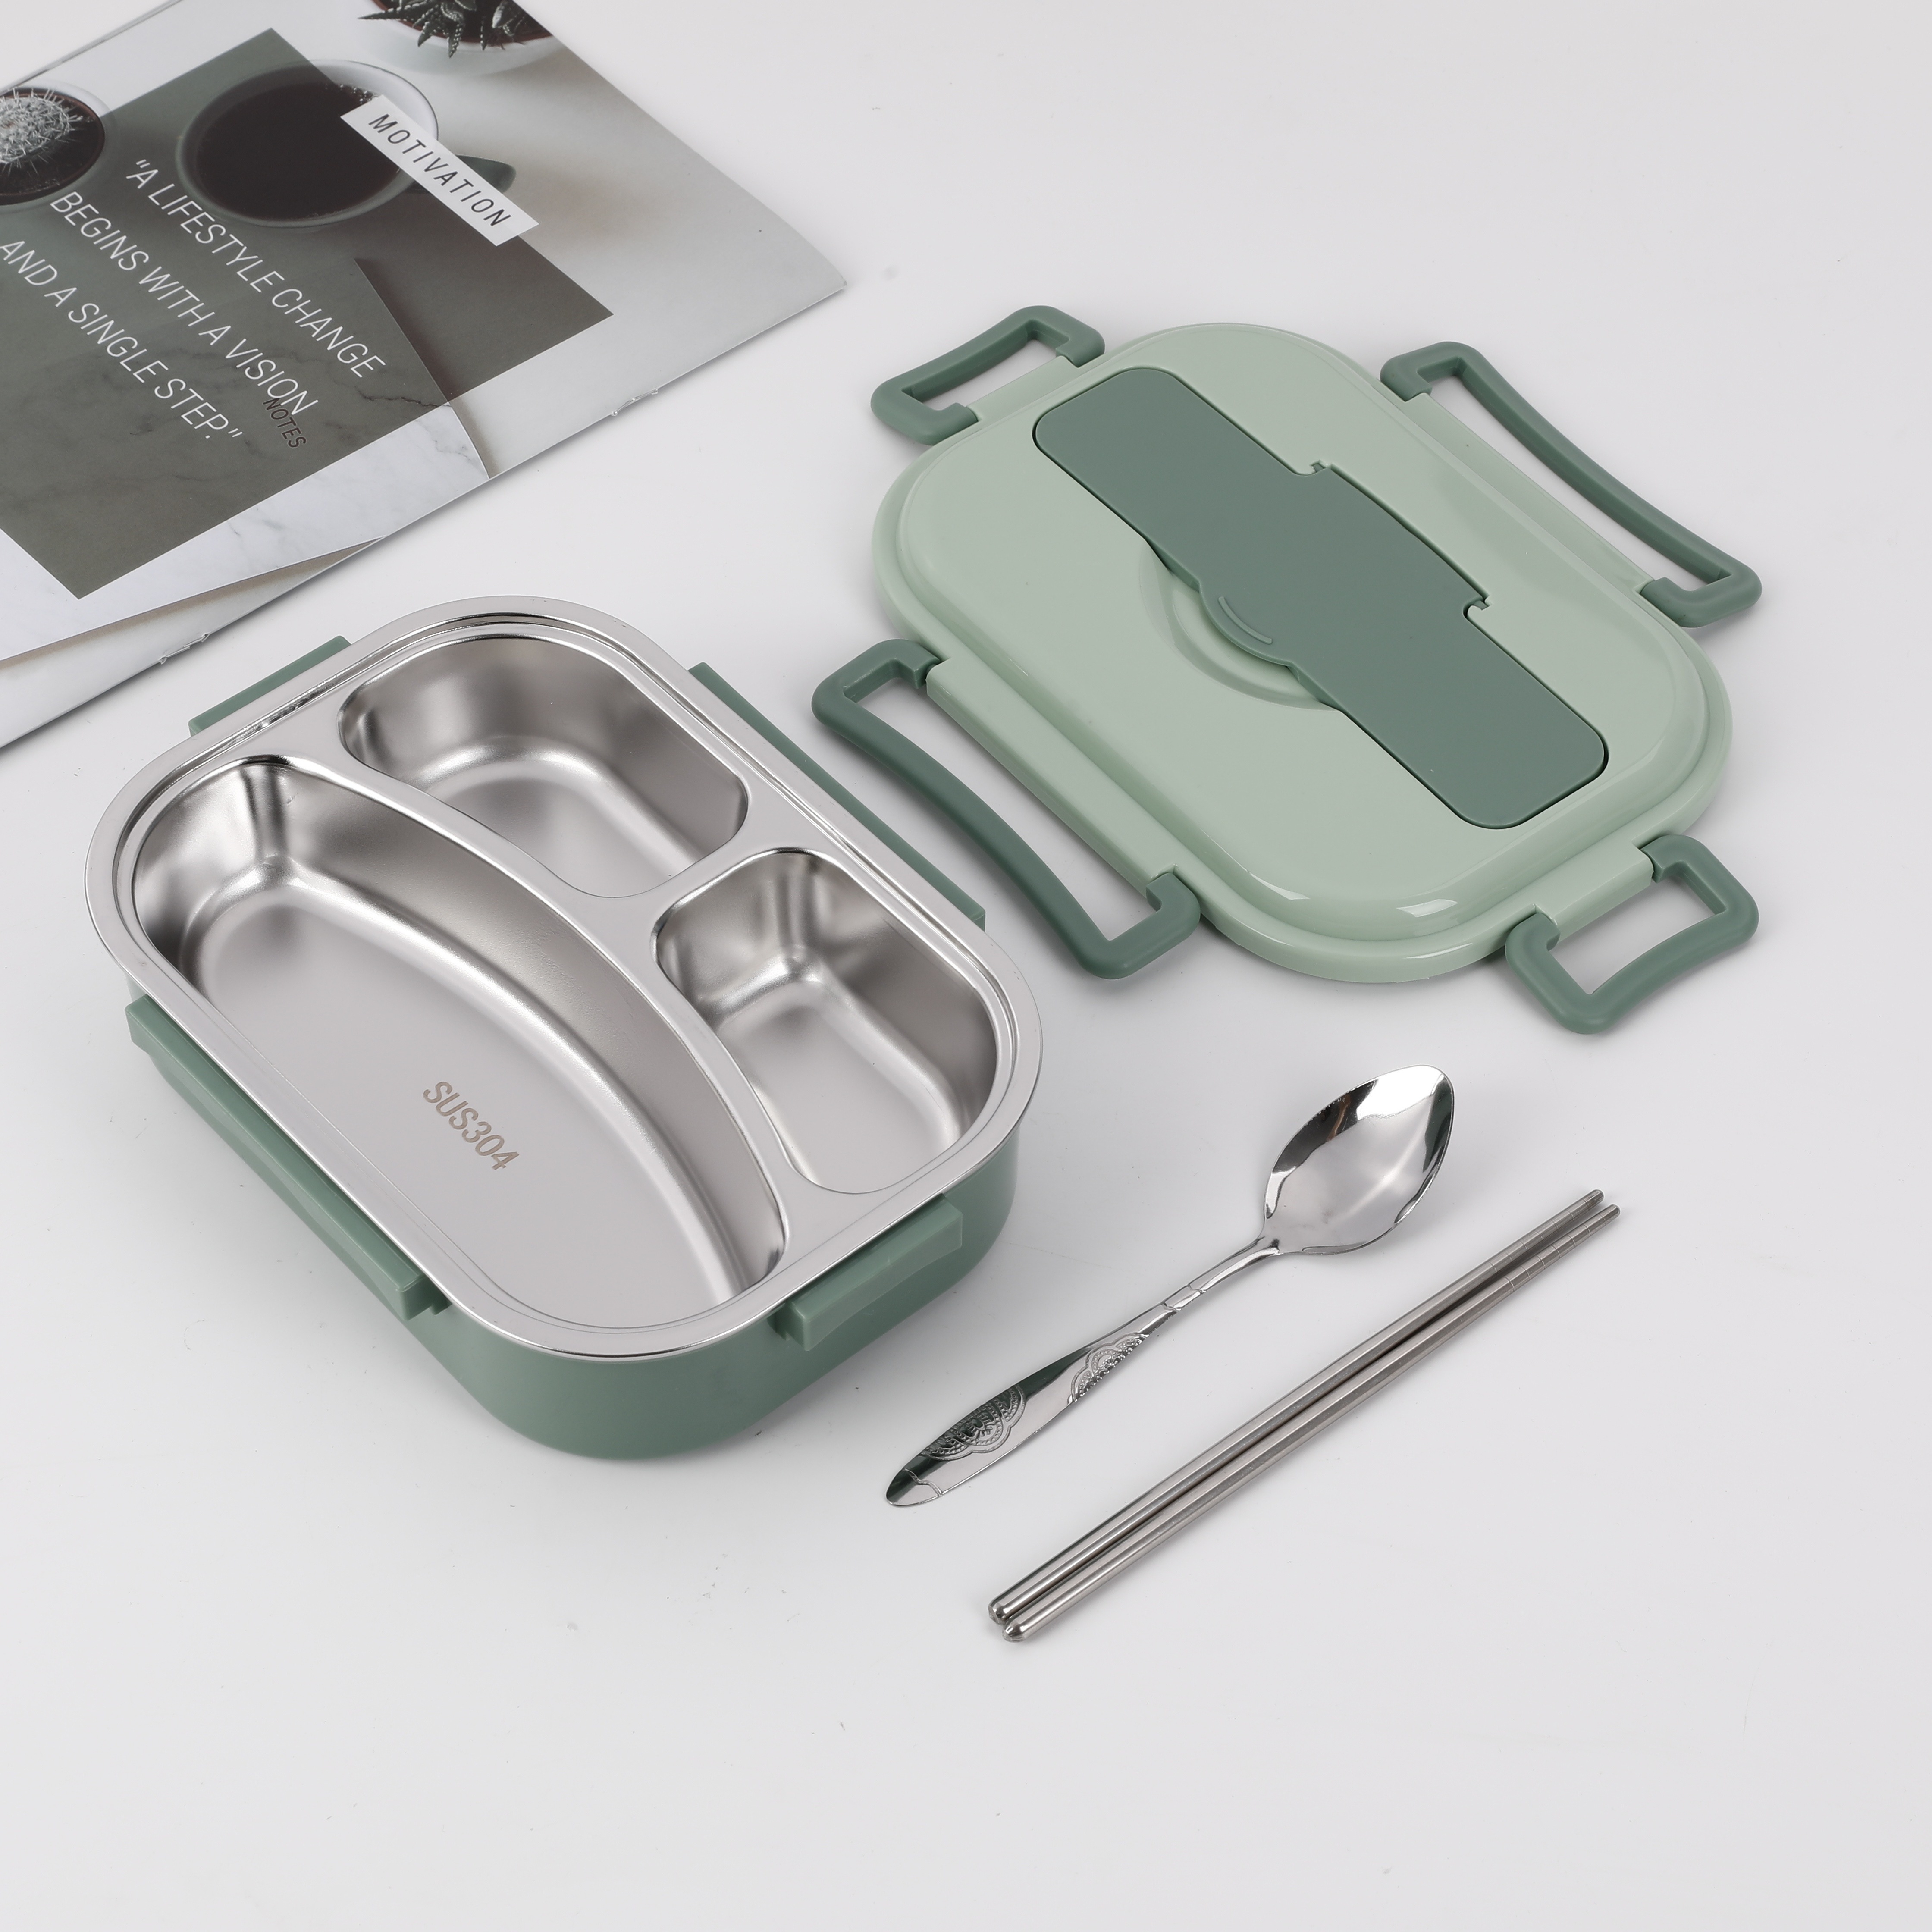 304 Stainless Steel Insulated Lunch Box With Dual Ear